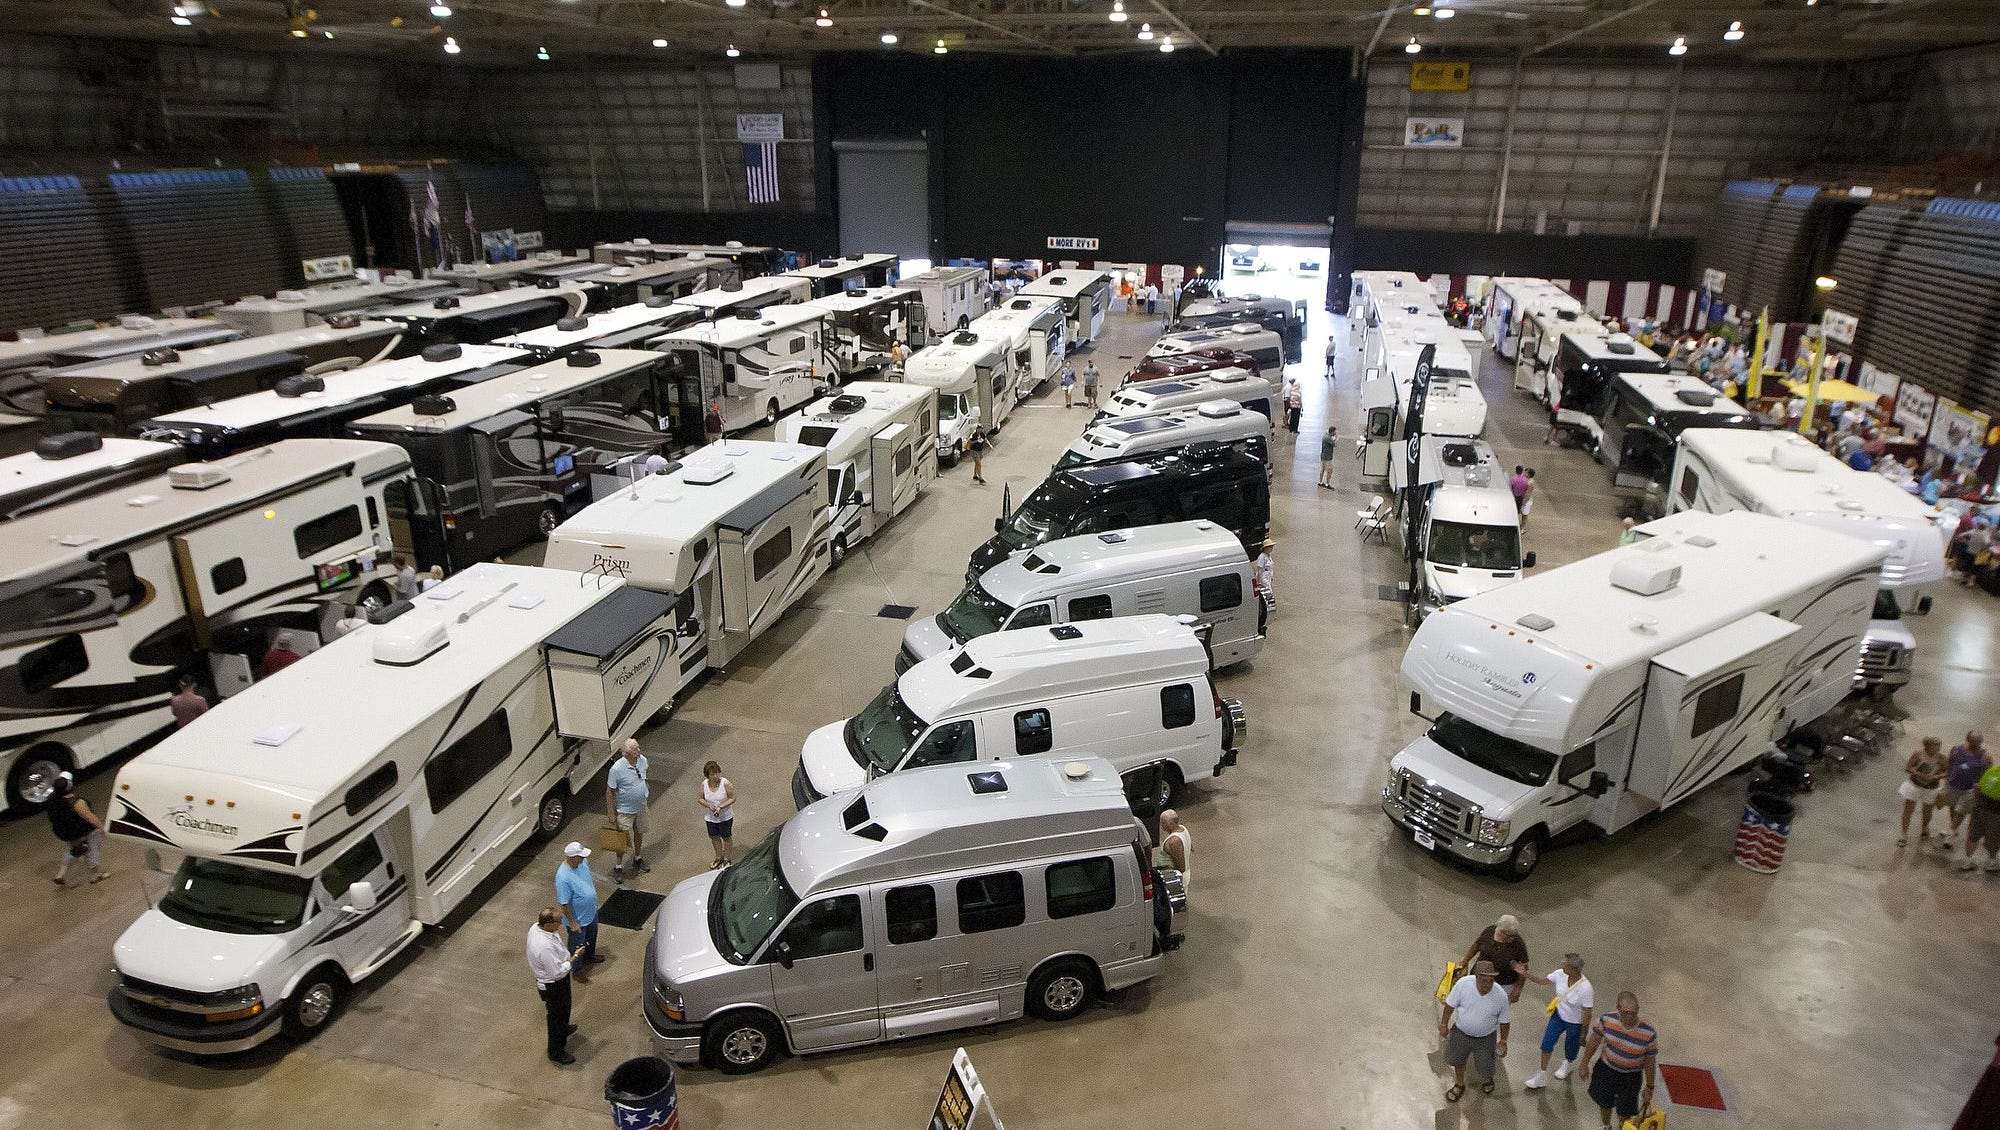 RV show coming to Lee Civic Center with rigs of all sizes